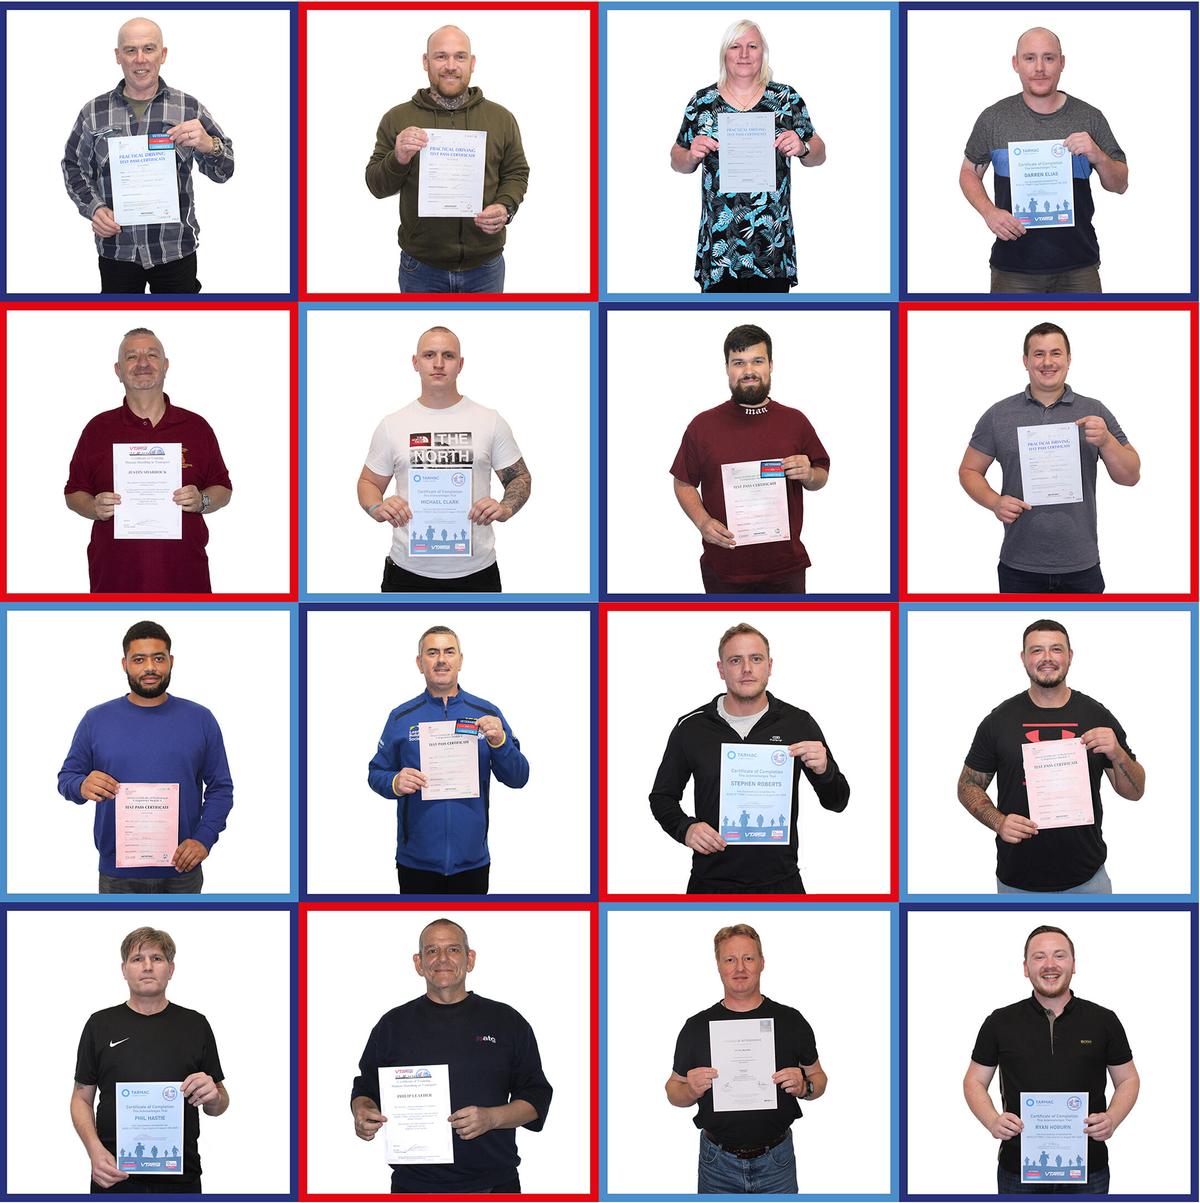 Former military servicemen, and a servicewoman, who have benefited from training provided by the organization Darren Wright conceived, Veterans Into Logistics. (Courtesy of <a href="https://veteransintologistics.org.uk/">Veterans into Logistics</a>)